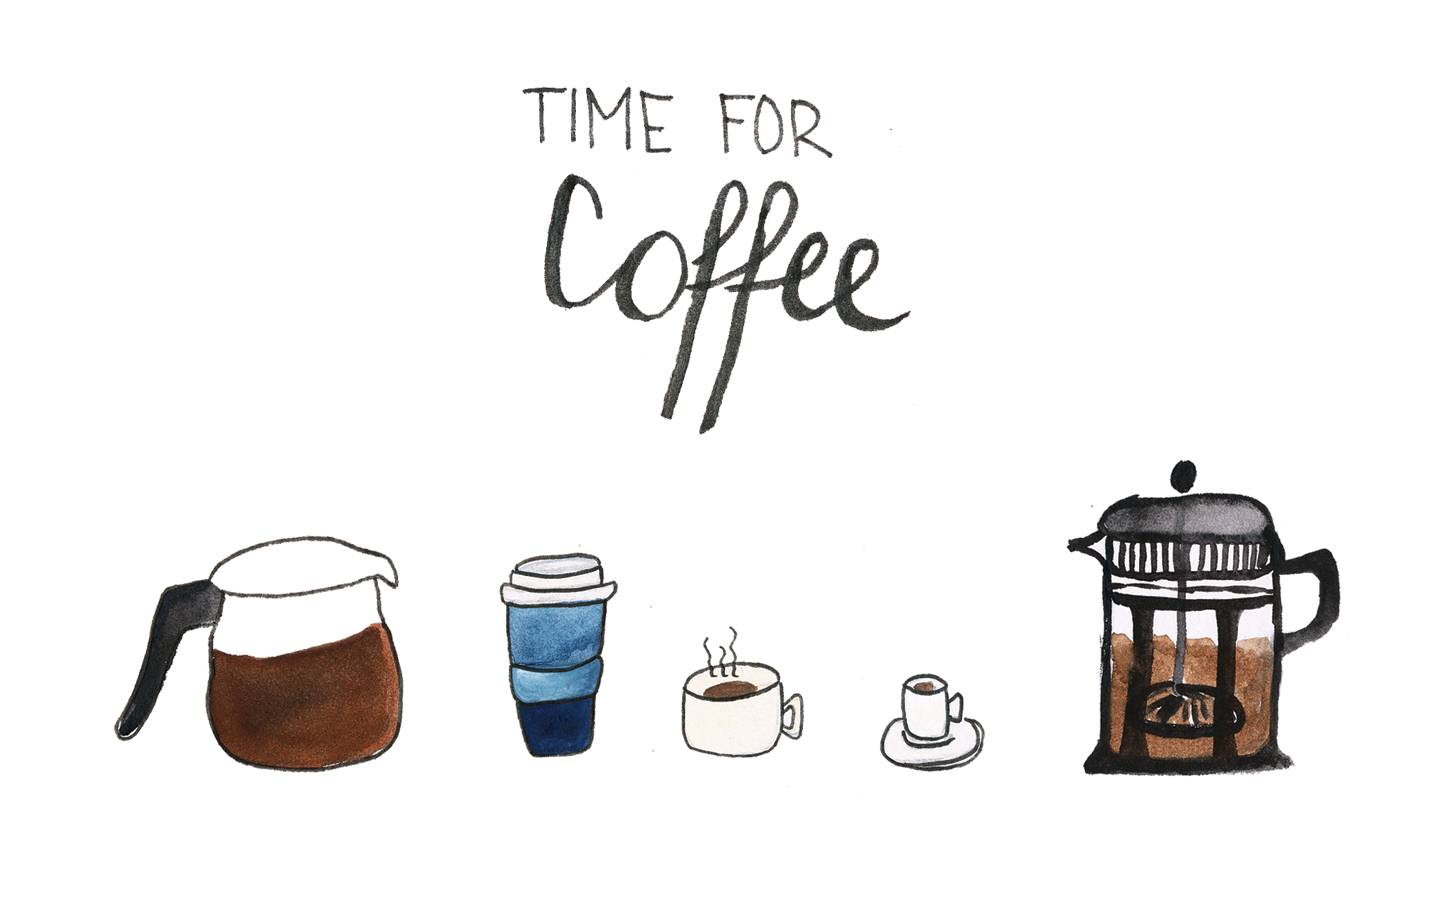 Wallpaper_Time-for-coffee_1440